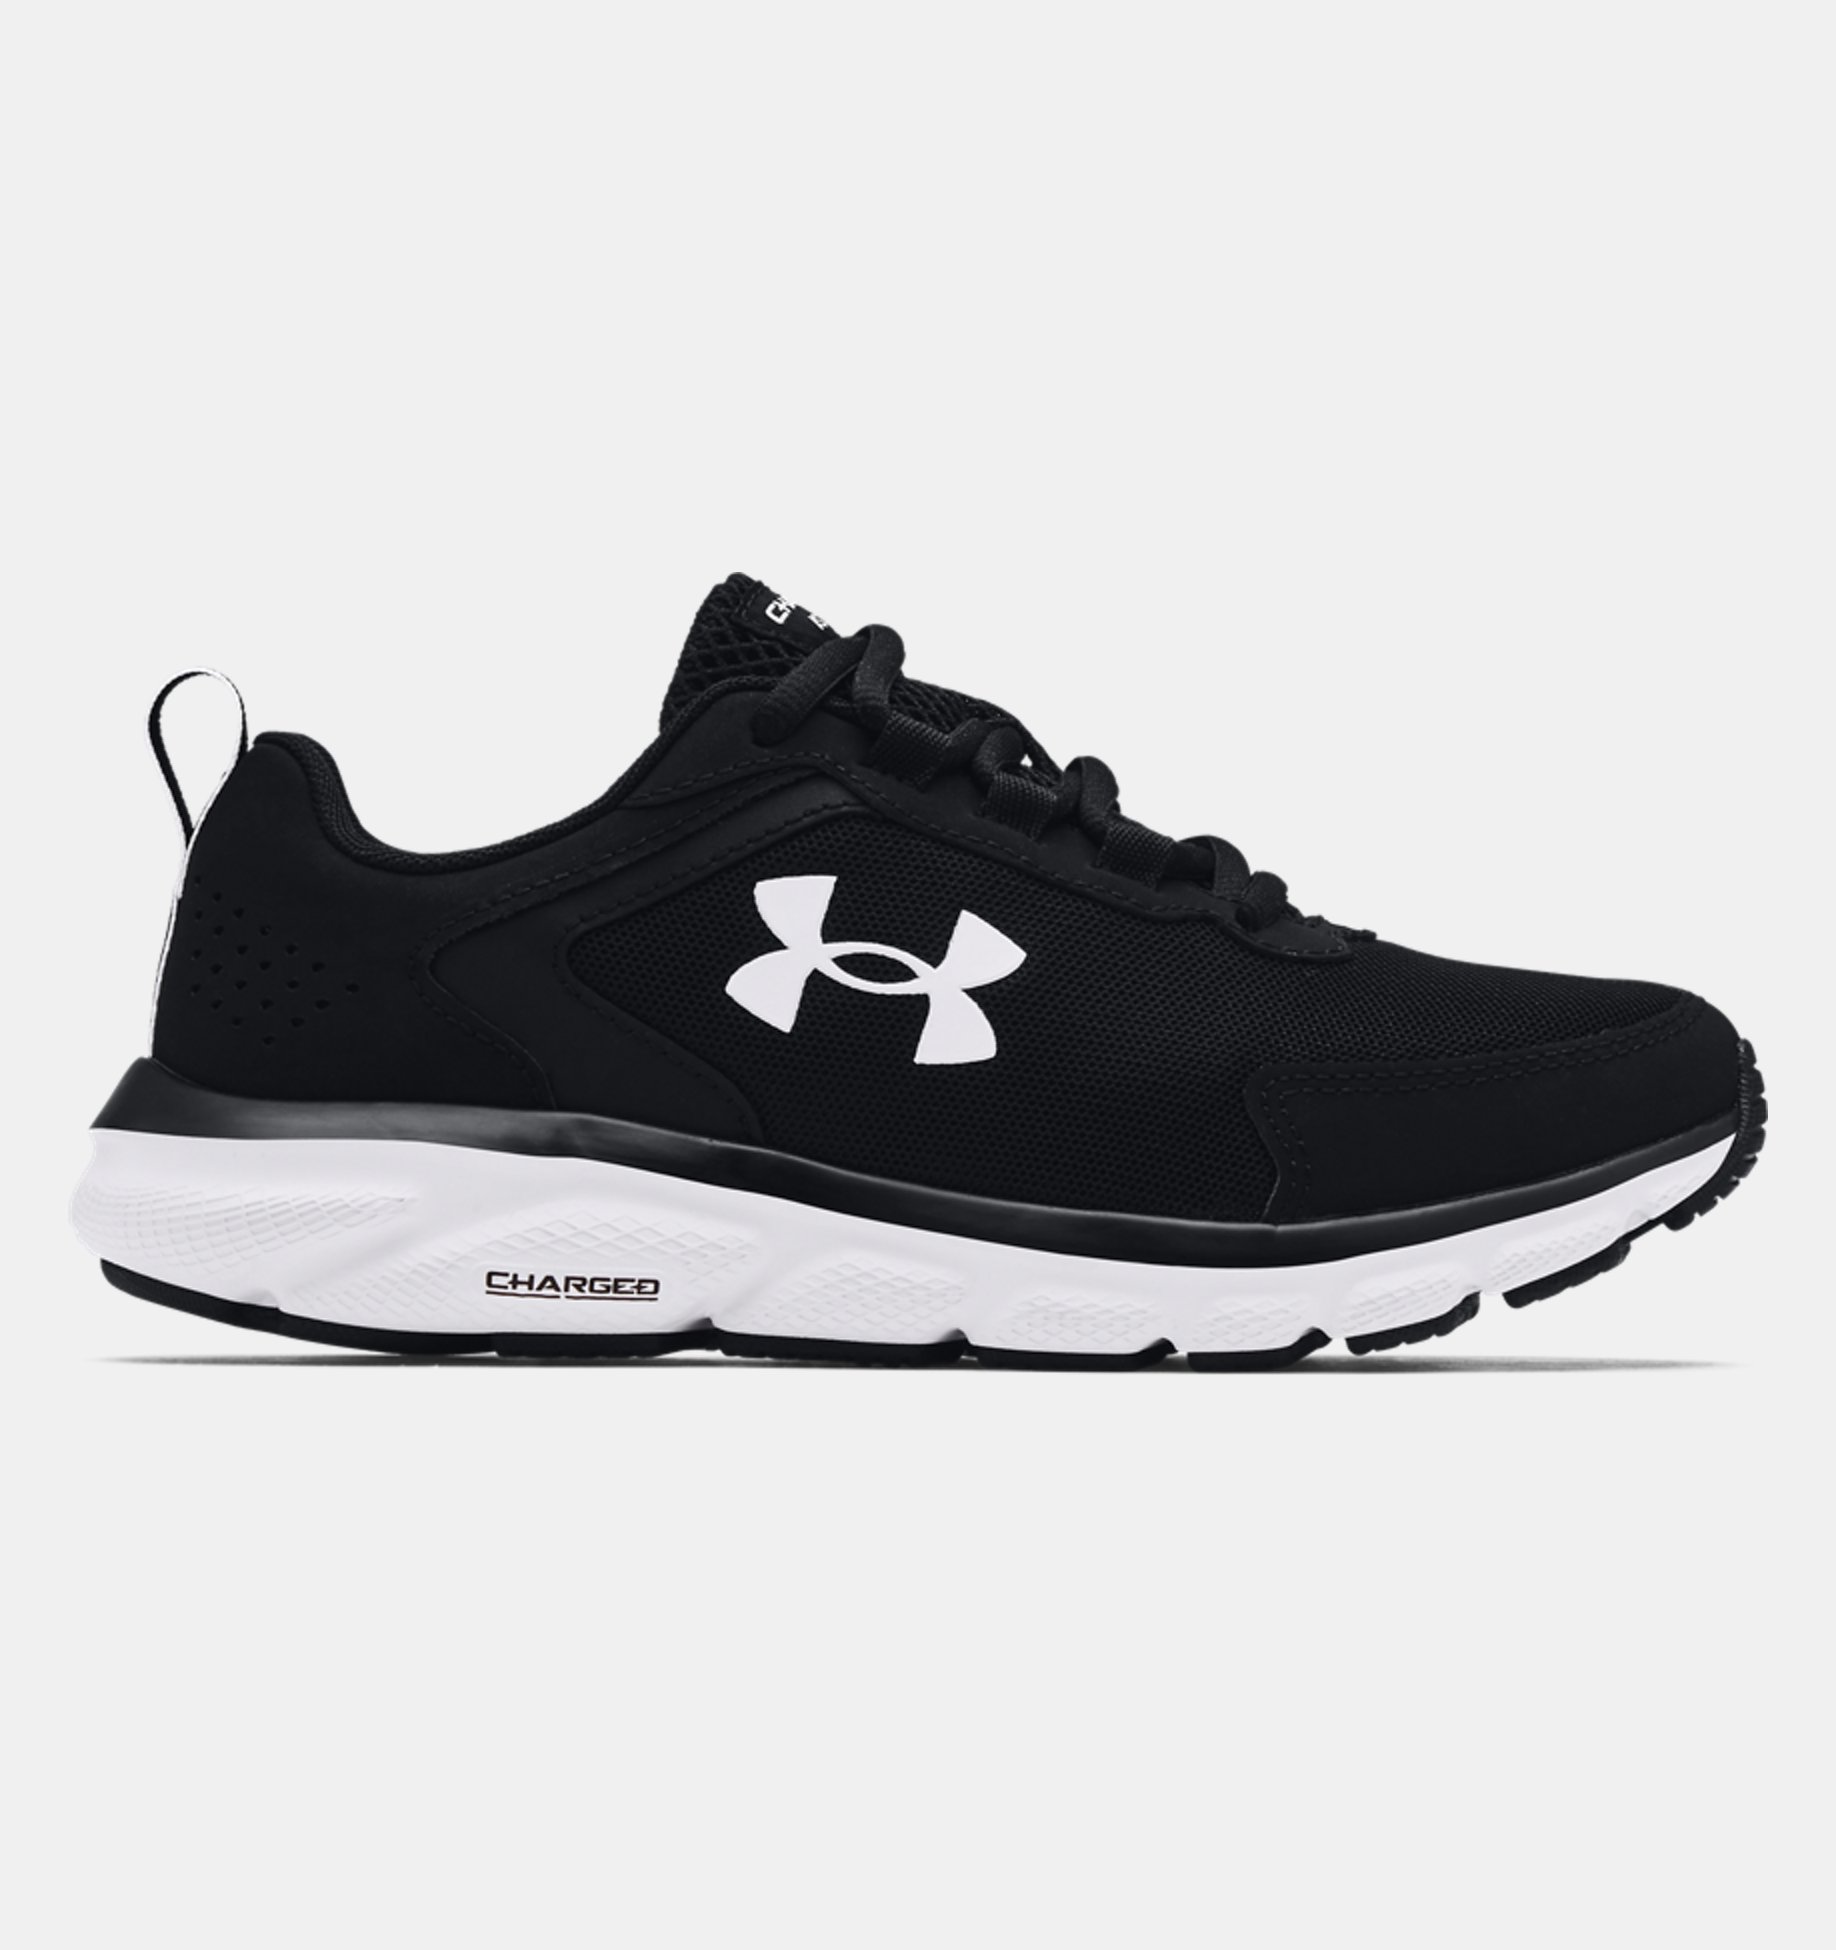 Are Under Armour Shoes Good for Wide Feet?